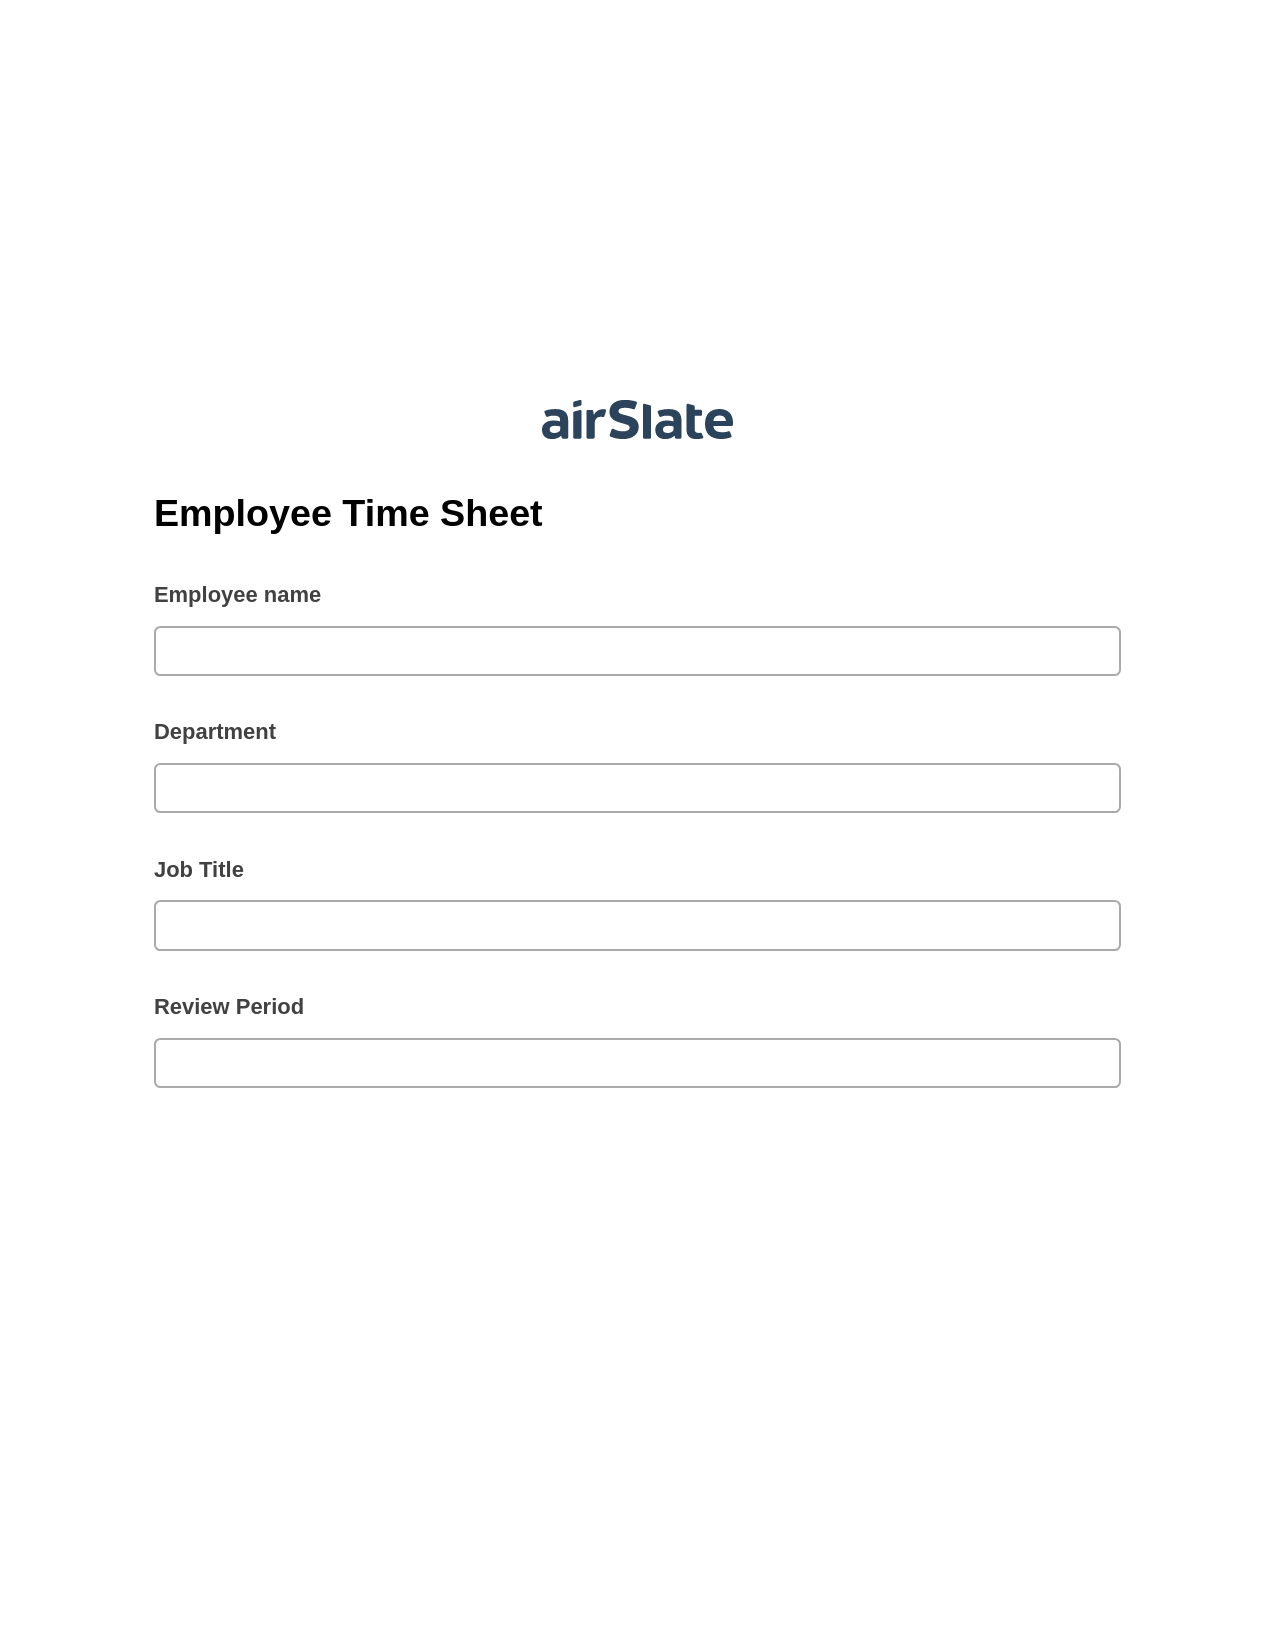 Multirole Employee Time Sheet Pre-fill from Salesforce Records Bot, Create slate addon, Archive to Google Drive Bot